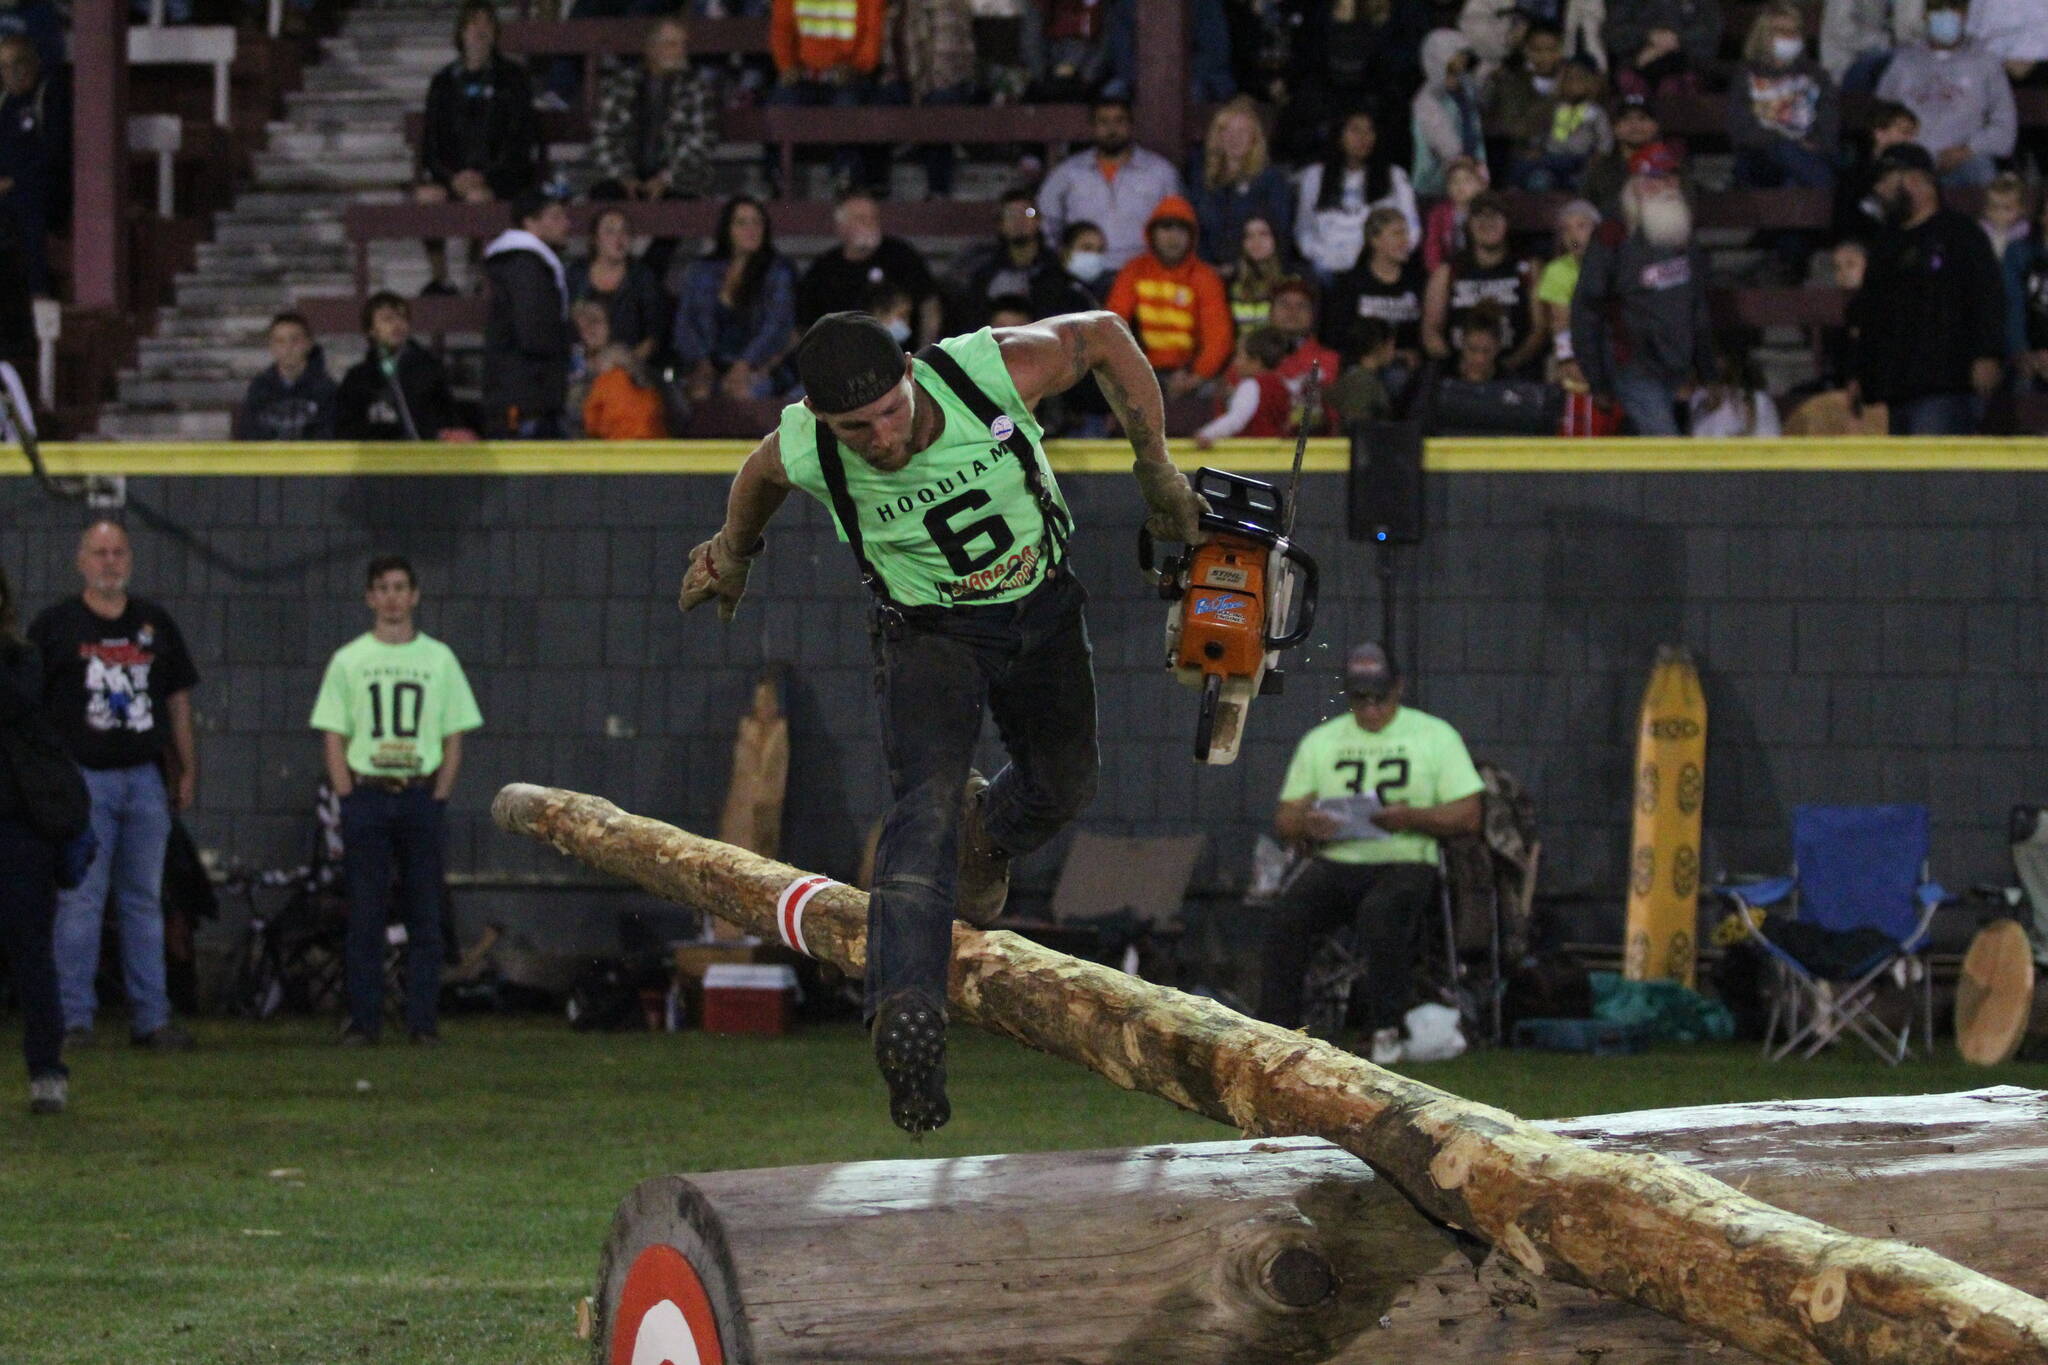 photo by Ben Winkelman 
Johnny Boggs competes in the challenging and entertaining obstacle pole competition at the 2021 Hoquiam Loggers Payday competition Saturday, Sept. 11, 2021, at Olympic Stadium.